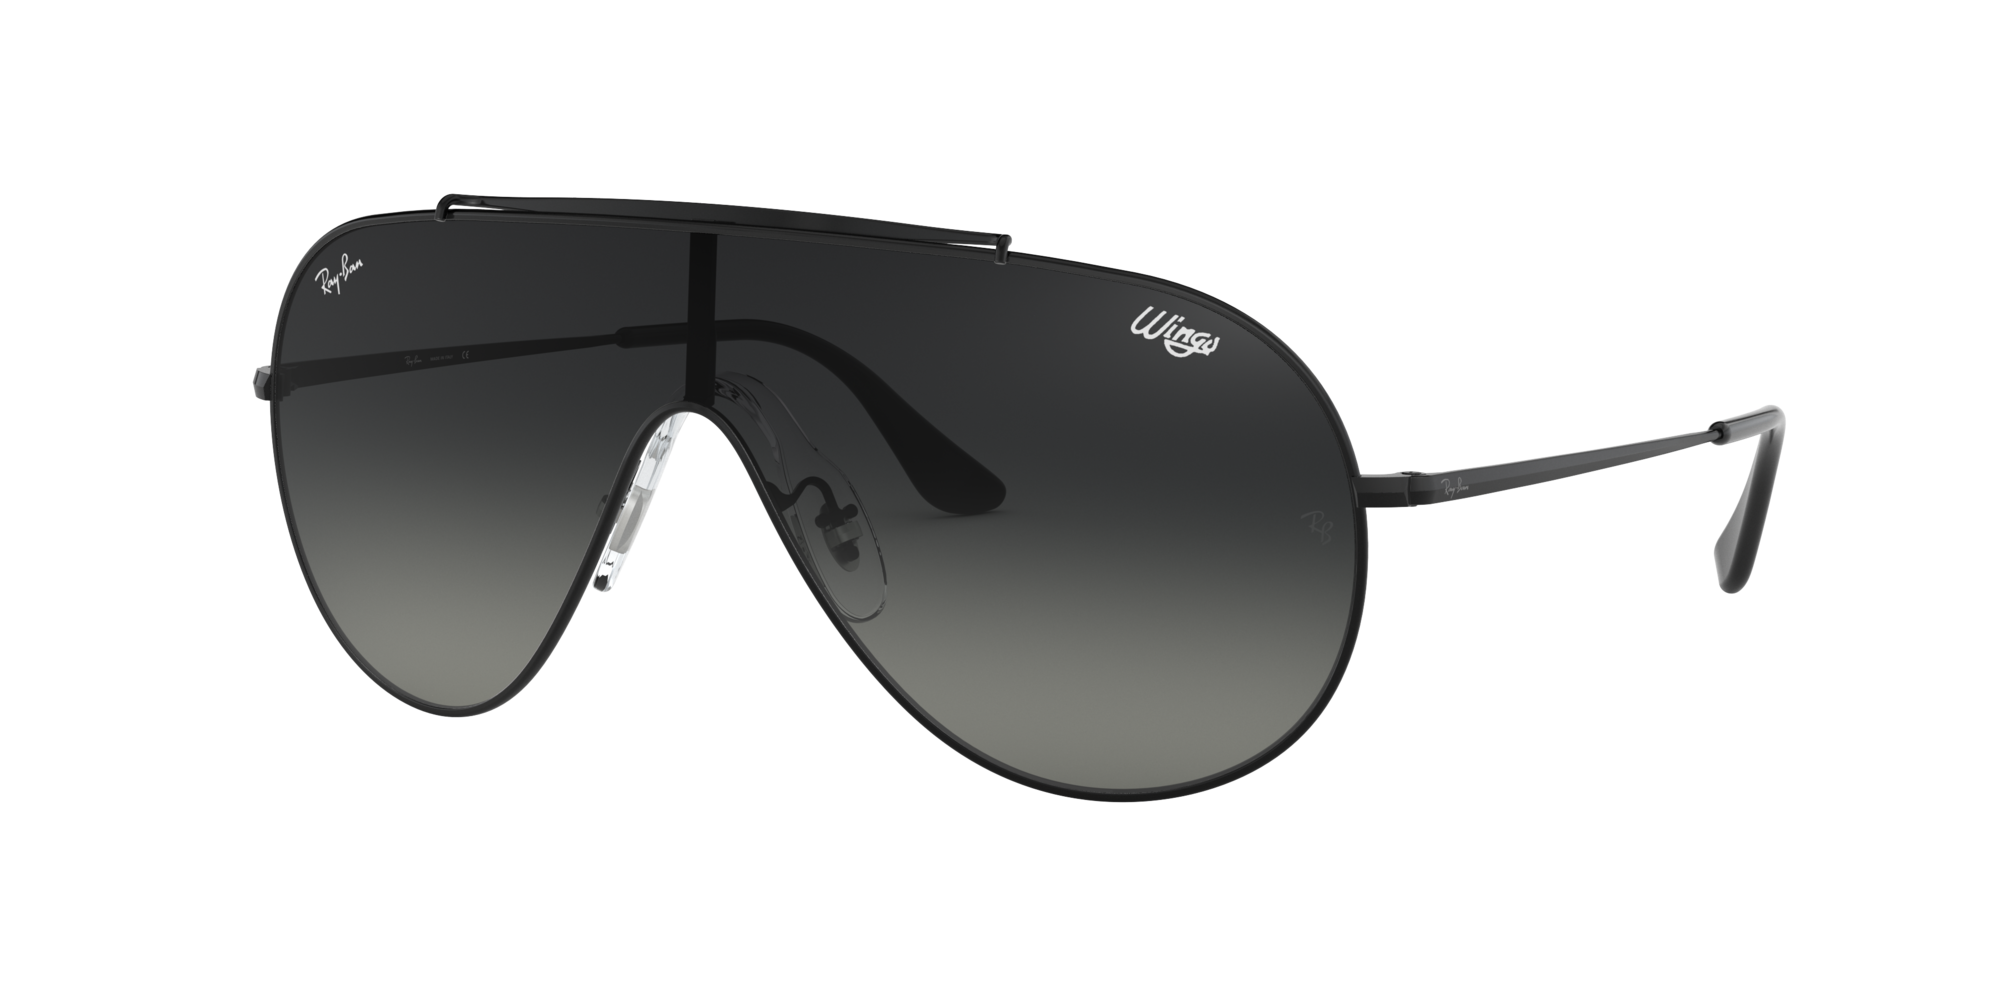 Ray-Ban RB3597 WINGS 01 Grey Gradient 